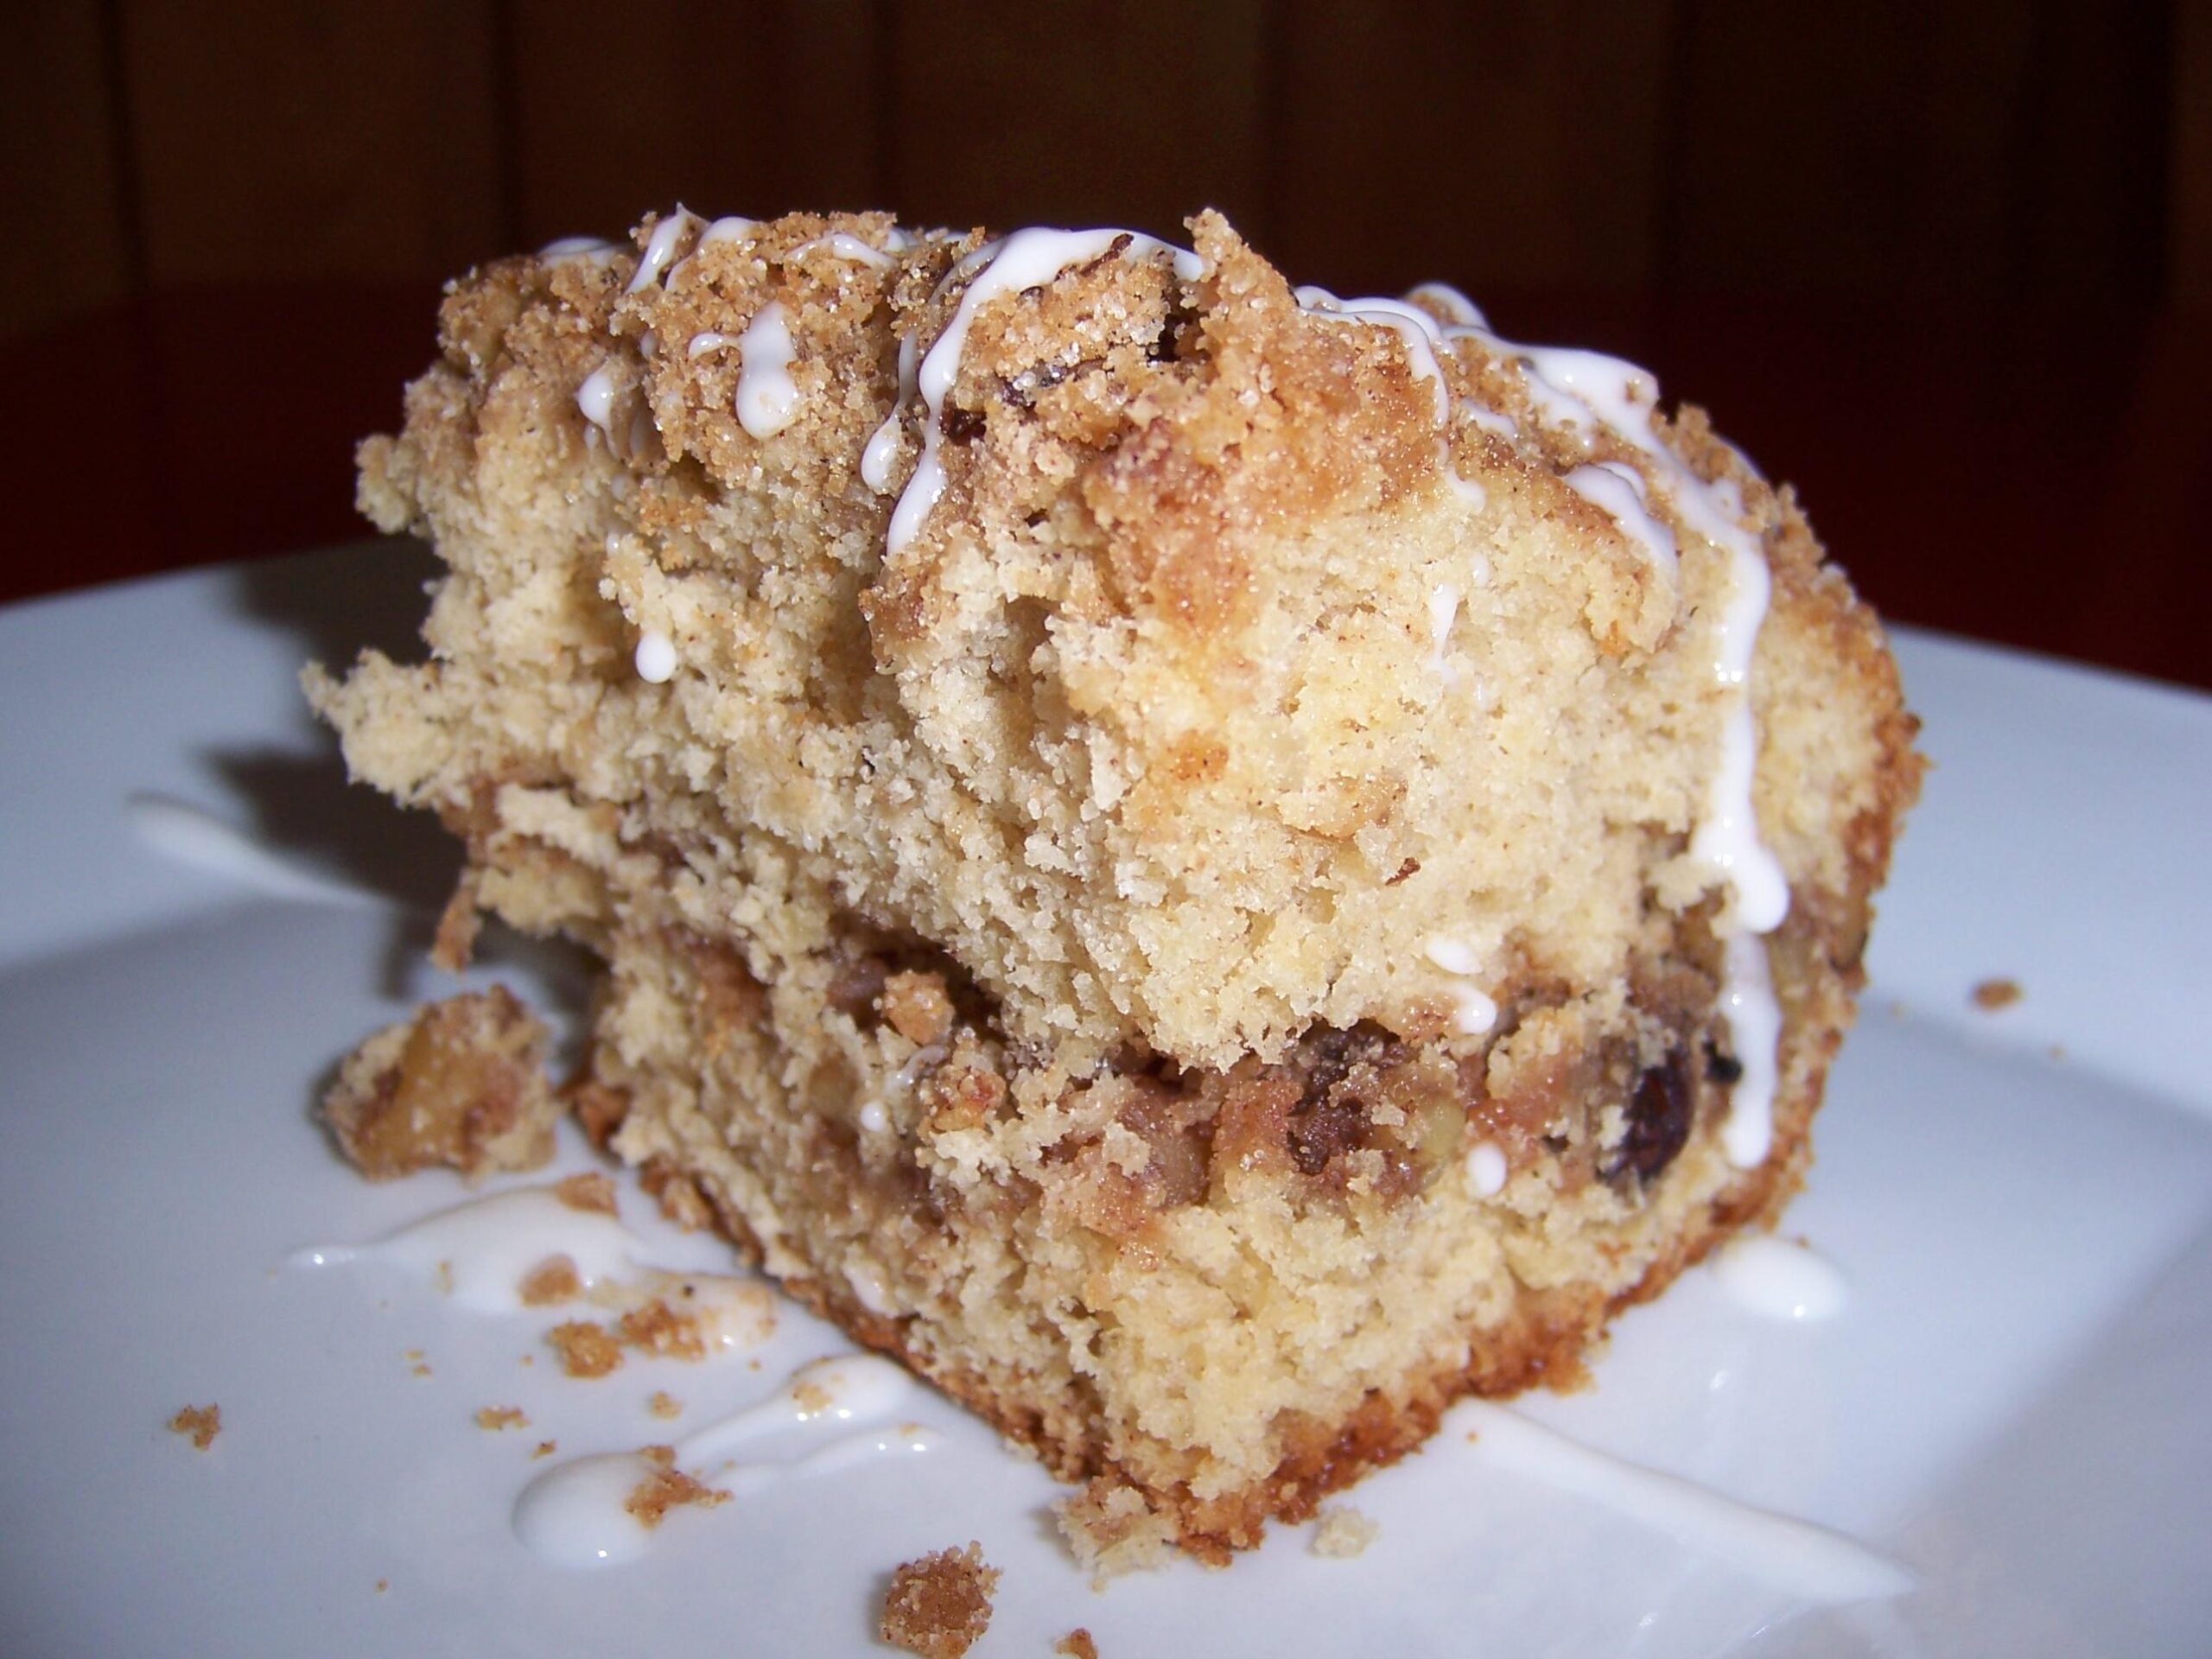  Enjoy your morning with a slice of this heavenly spiced walnut coffee cake!